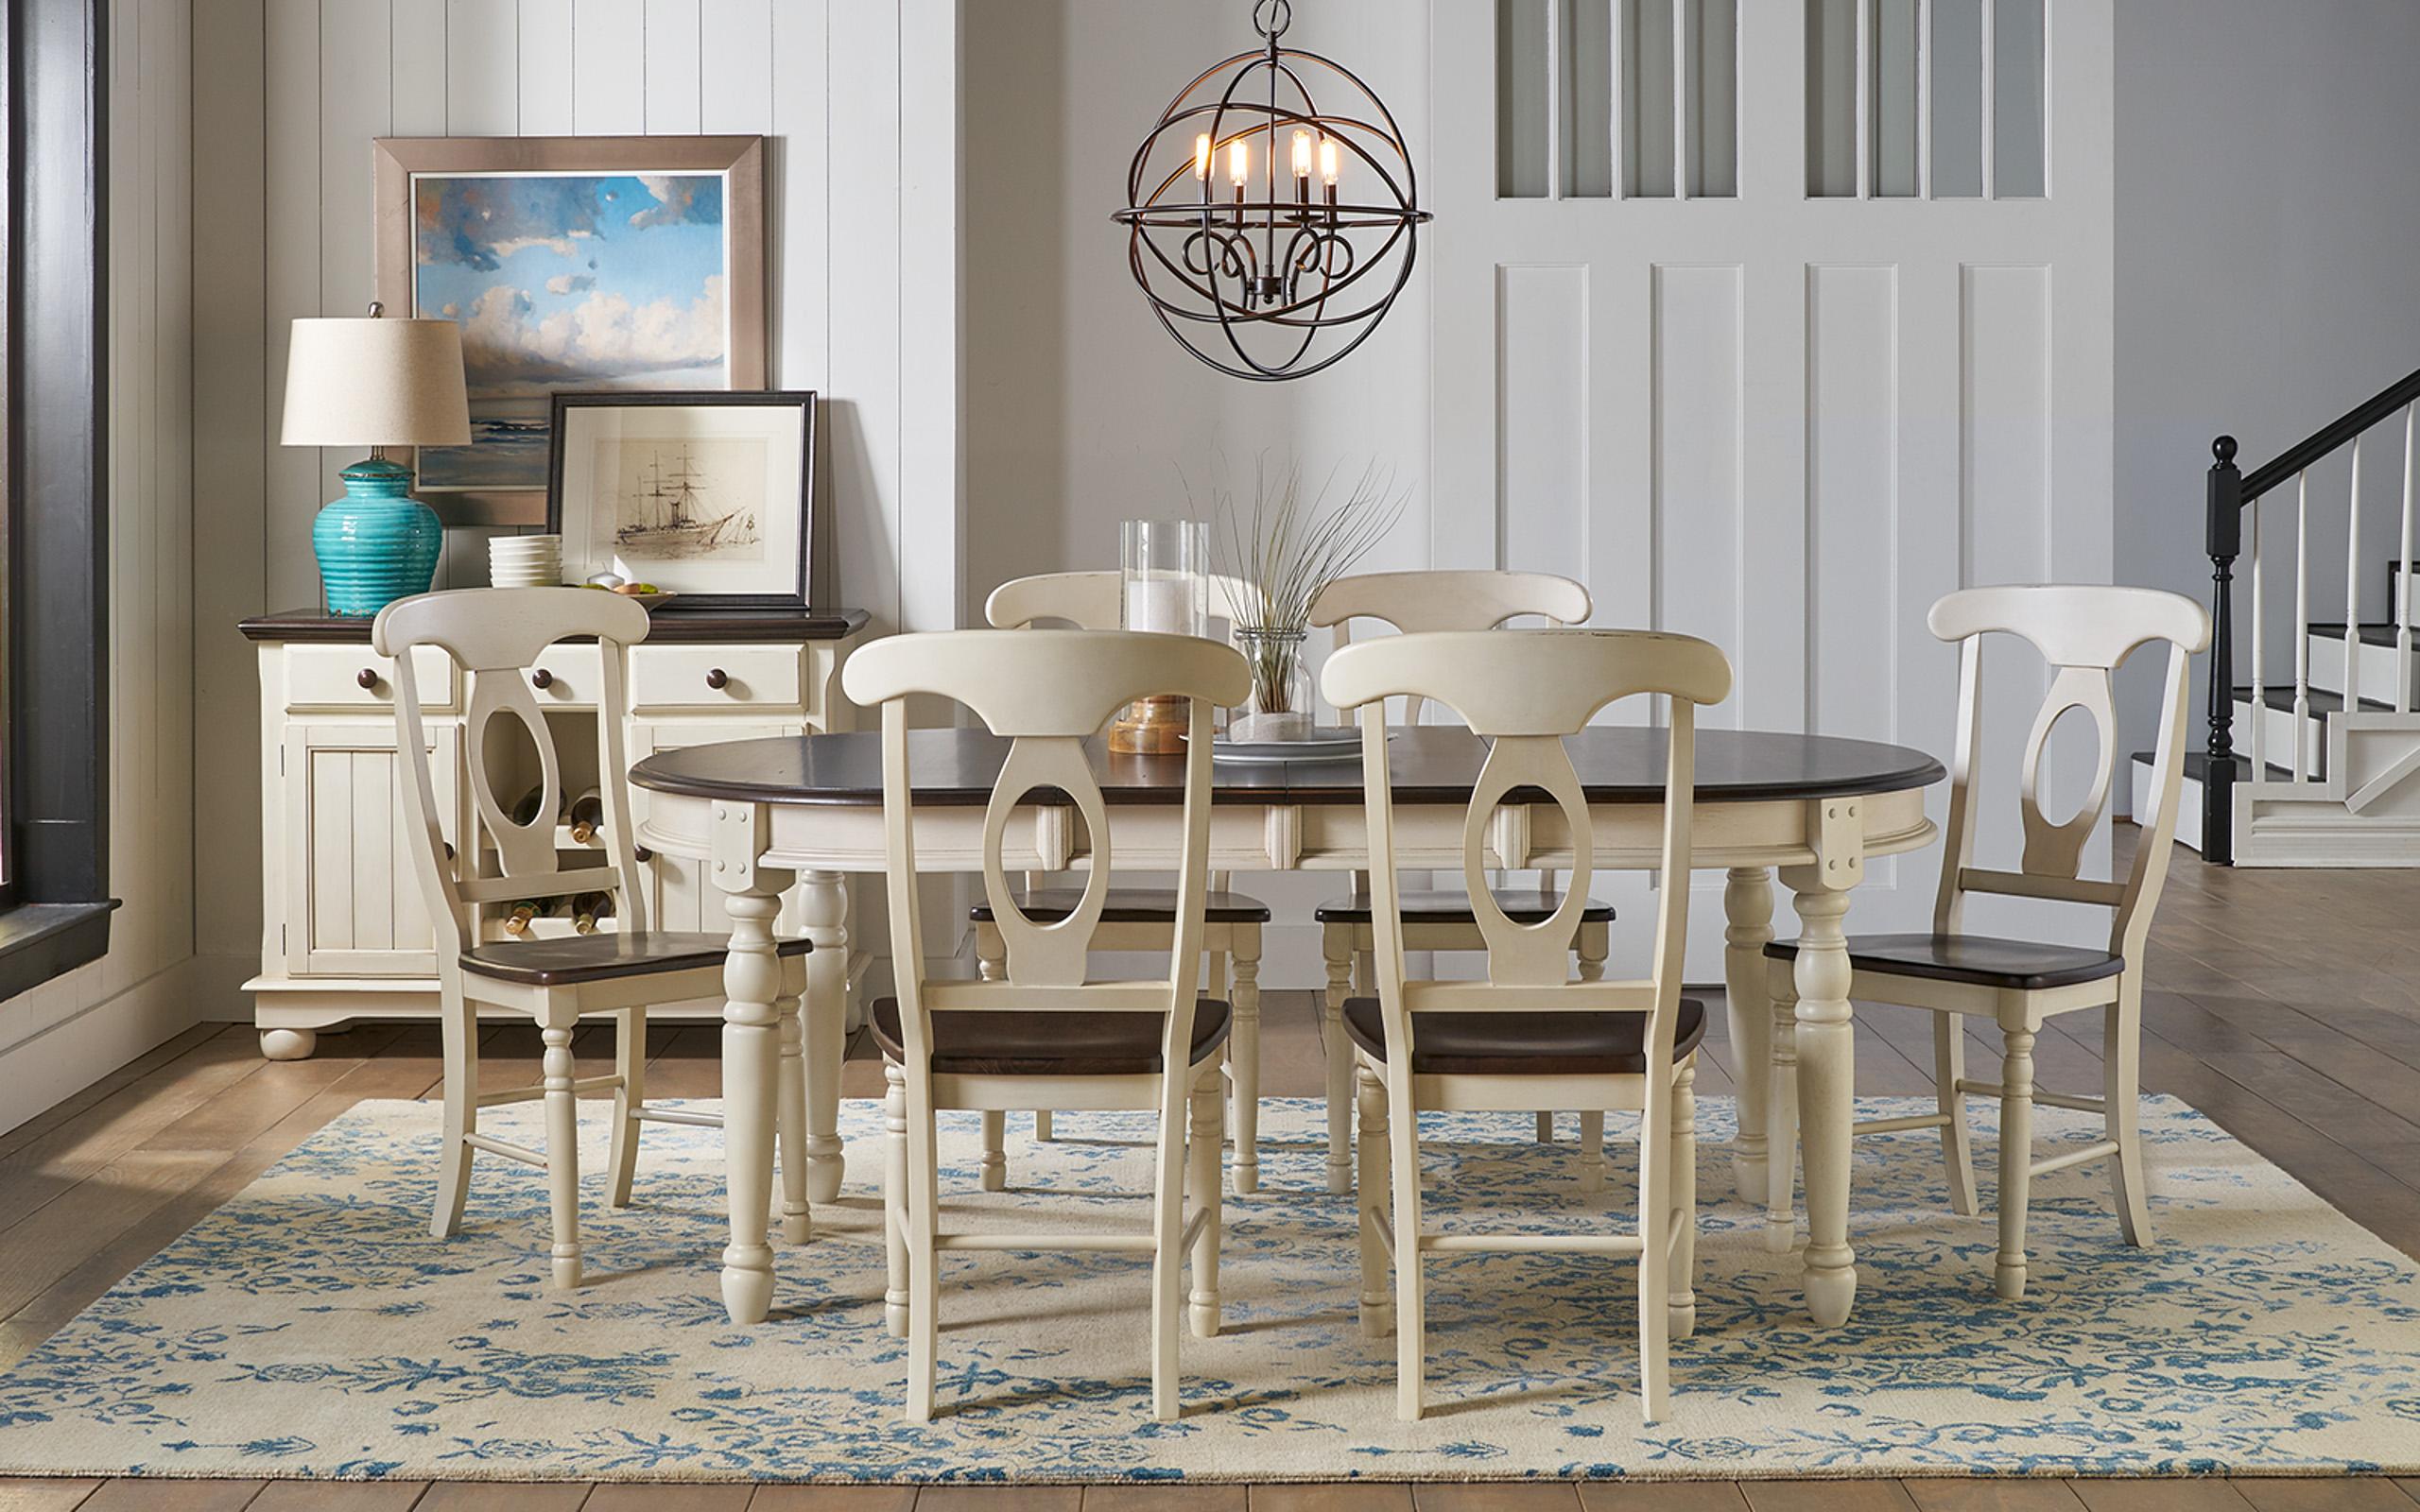 Rustic Dining Table Set British Isles CO BRICO6310-Set-8 in Cocoa, Off-White 